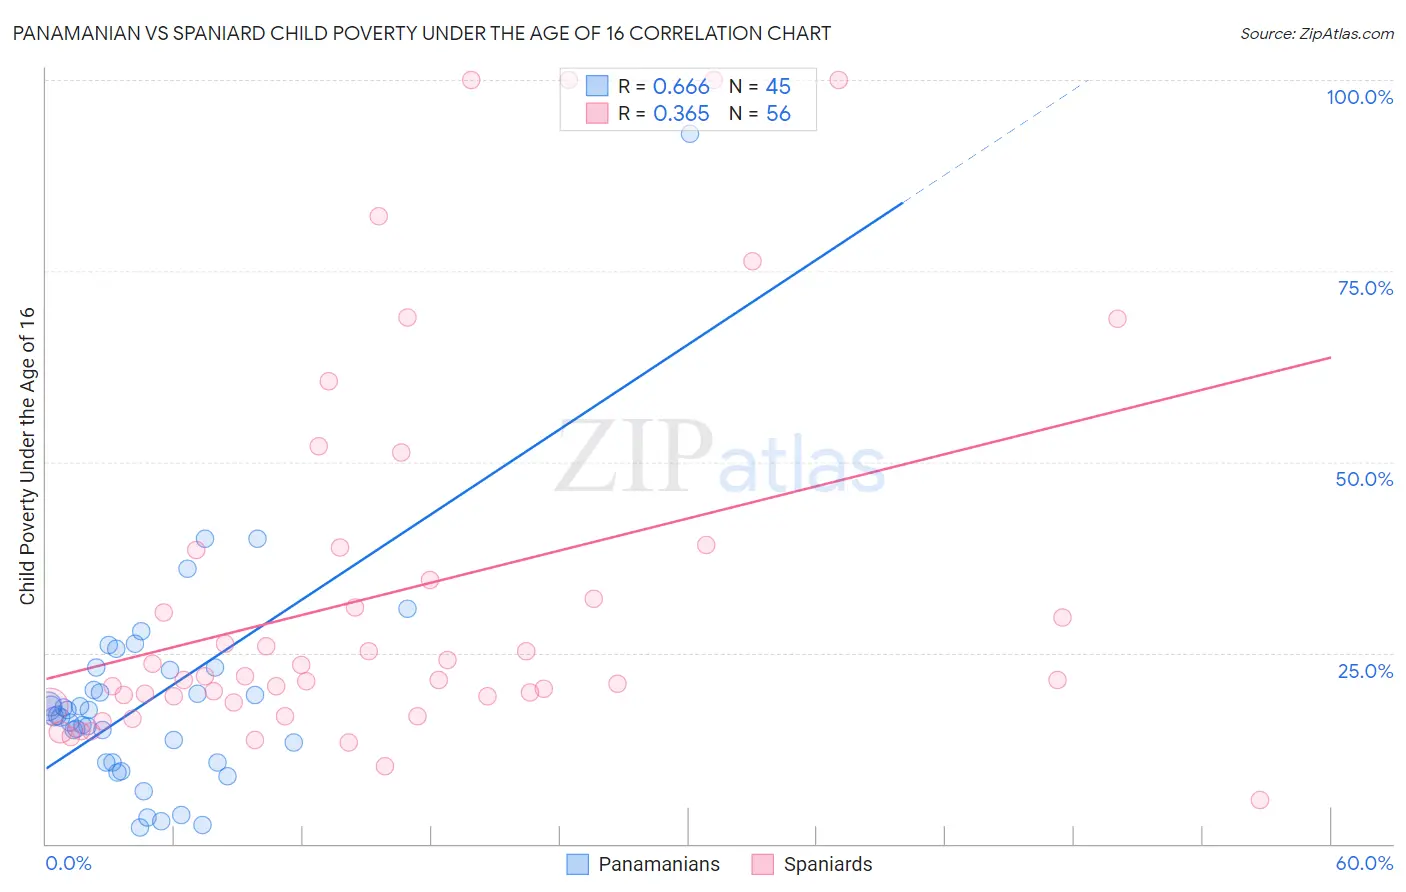 Panamanian vs Spaniard Child Poverty Under the Age of 16